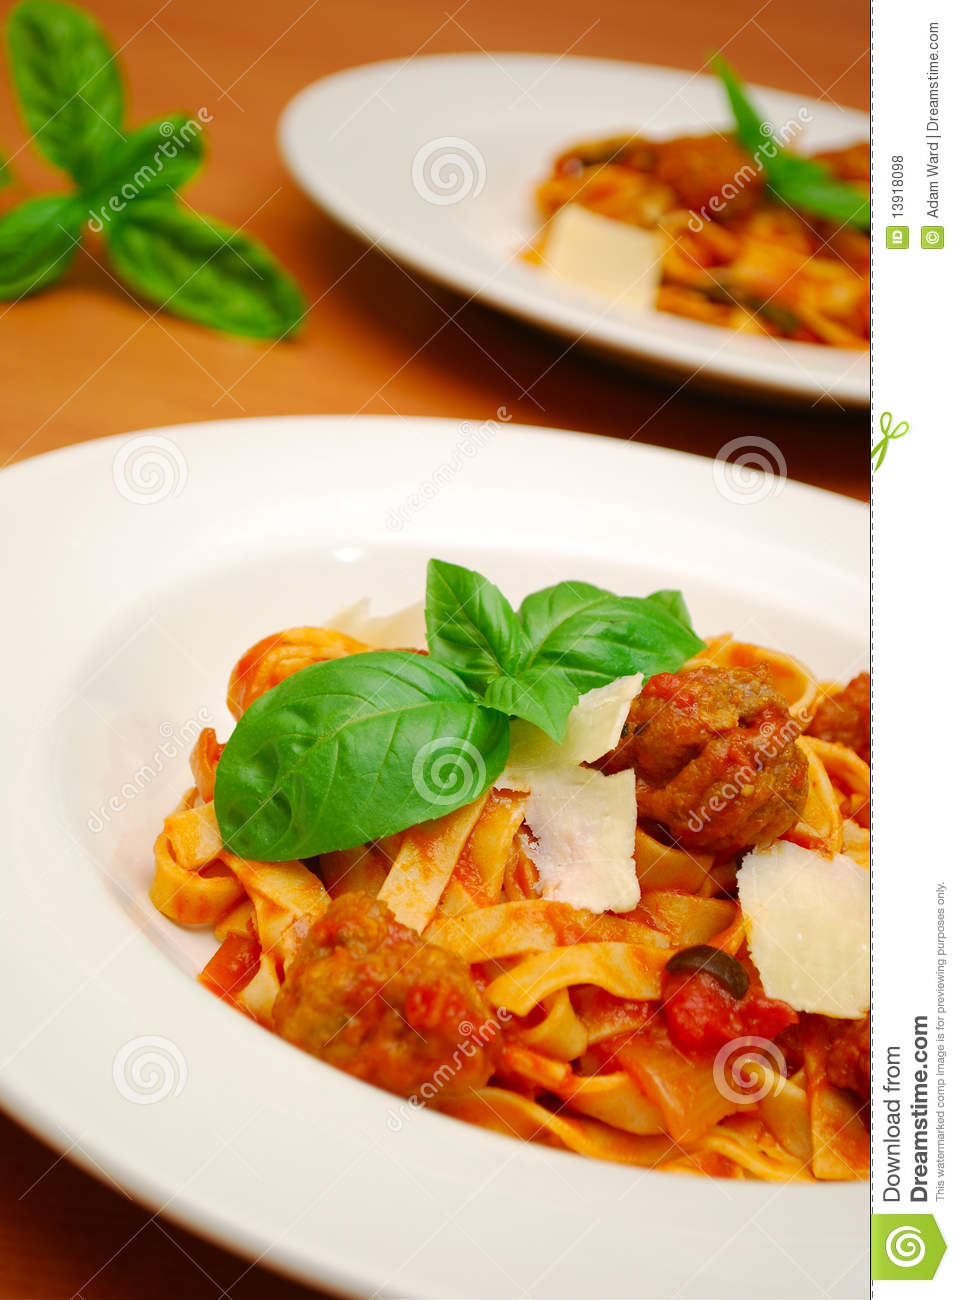 Italian Food Clipart Images   Crazy Gallery